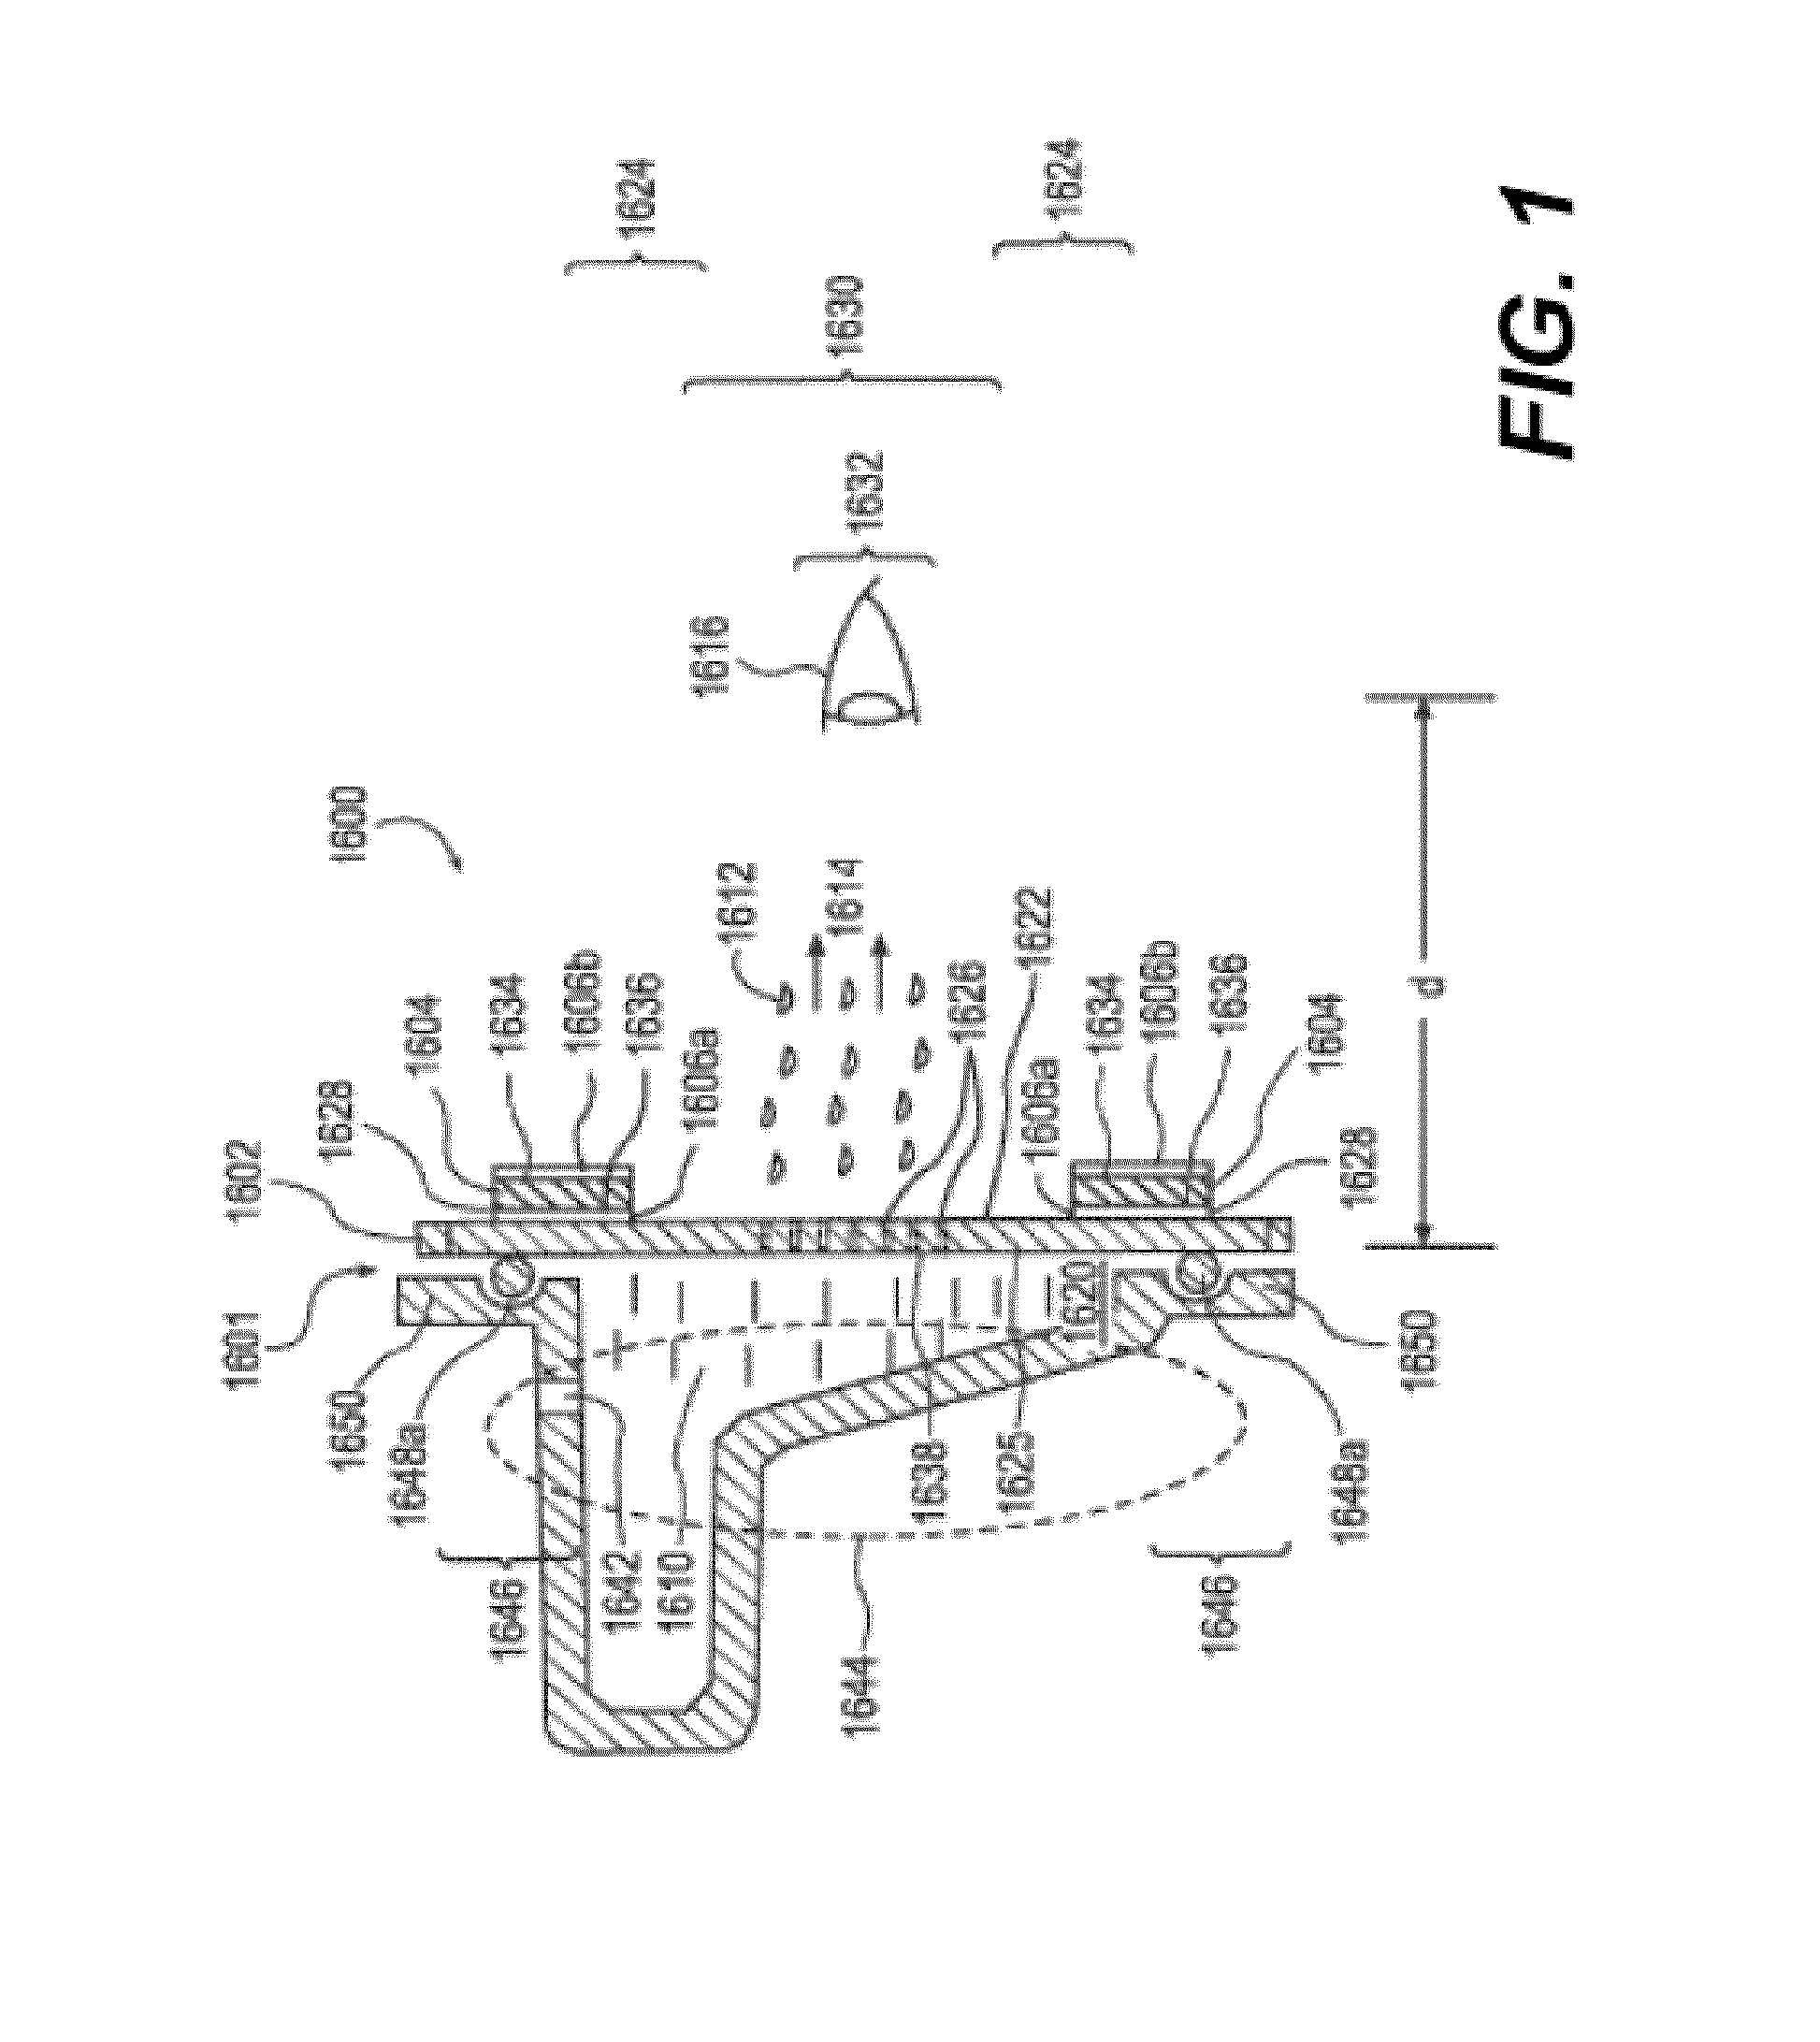 Spray ejector mechanisms and devices providing charge isolation and controllable droplet charge, and low dosage volume ophthalmic administration